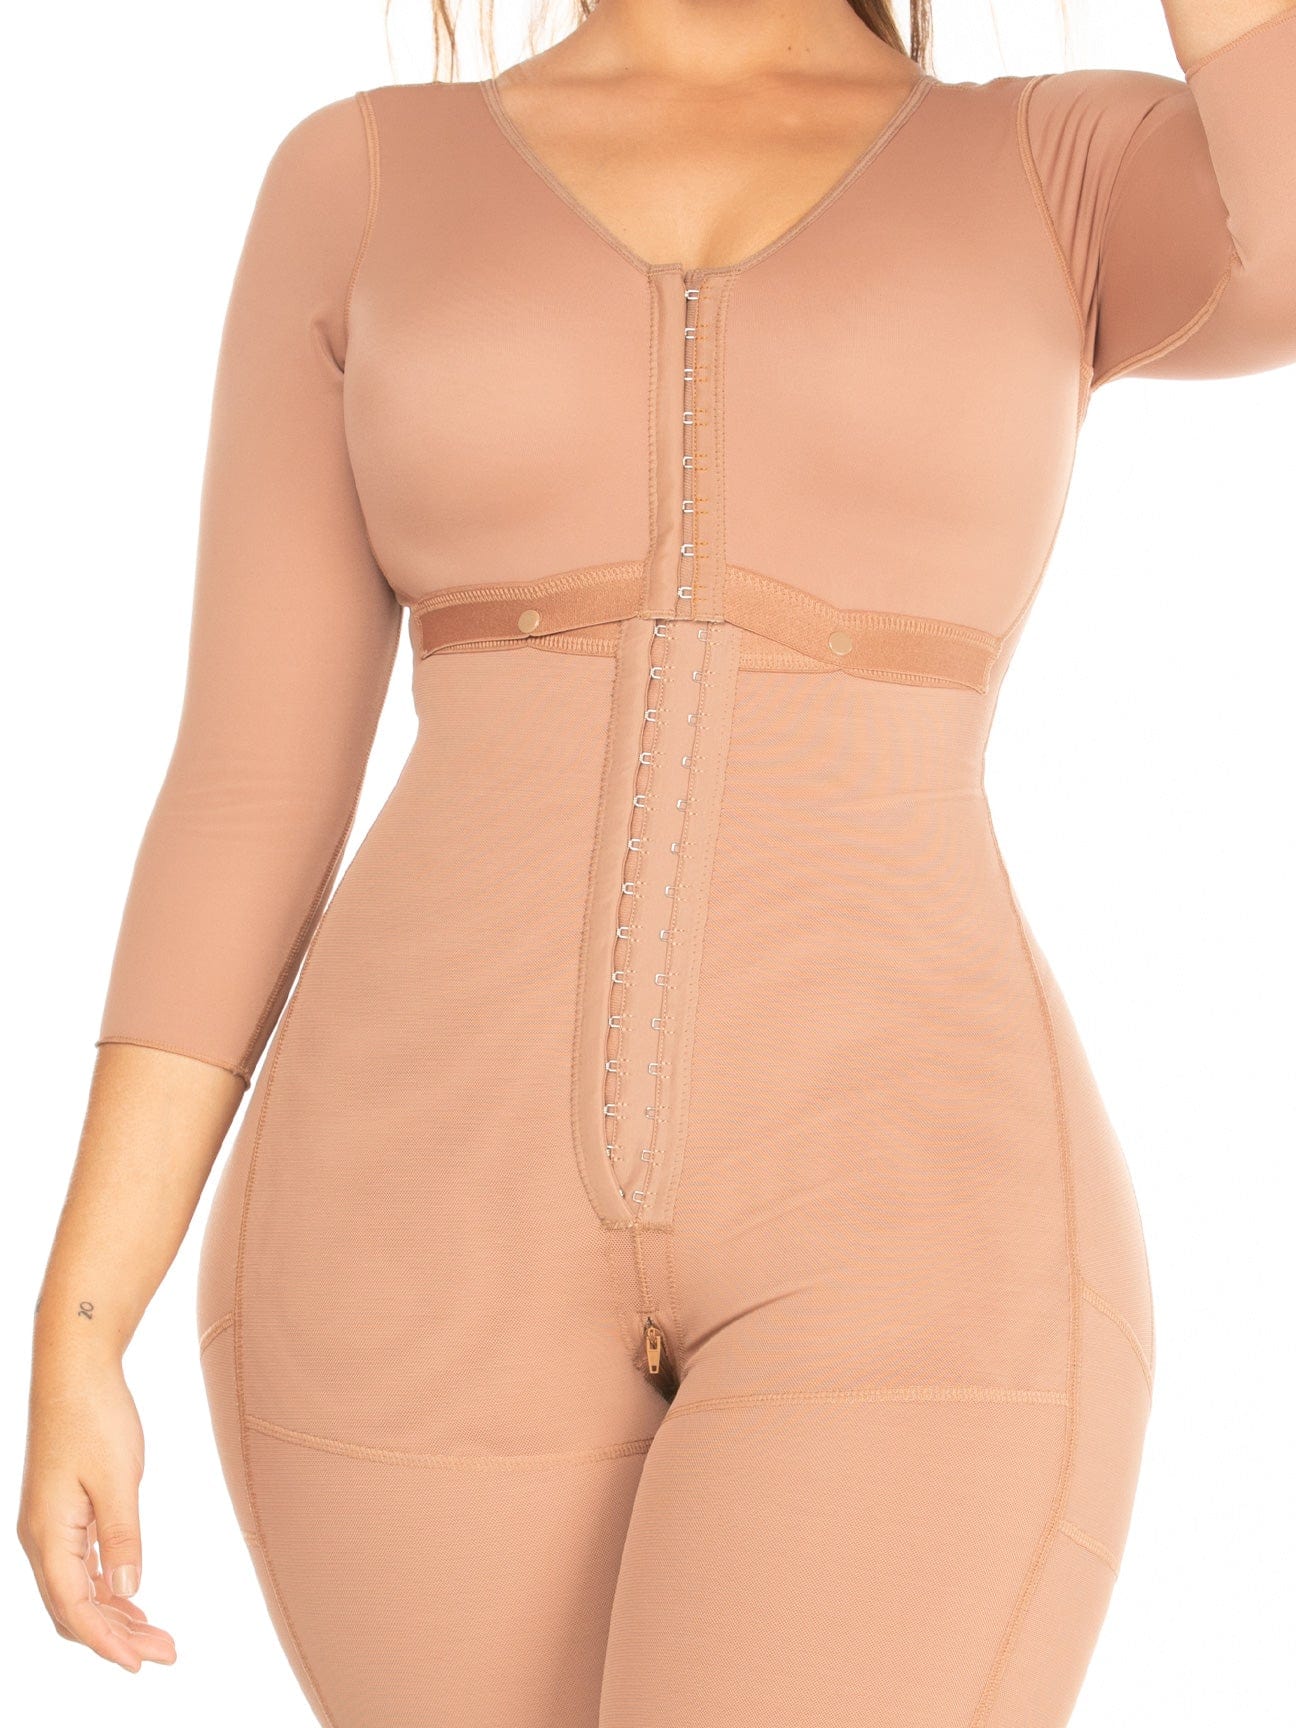 MALE FULL BODY MID THIGH FAJA WITH SLEEVES - LekkiHill